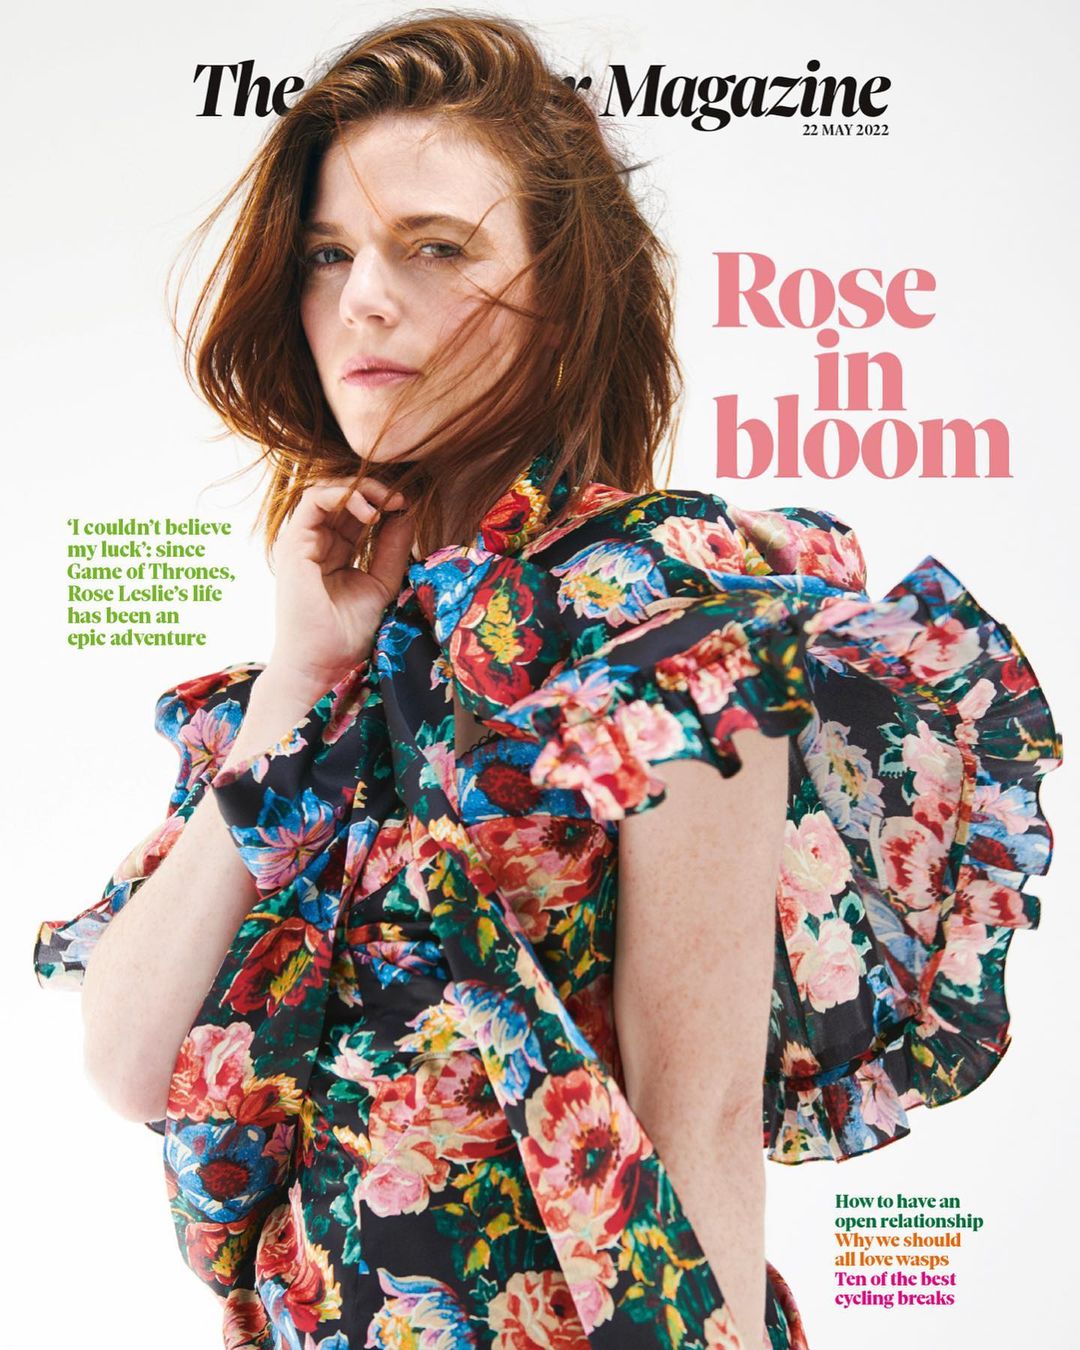 Rose Leslie Game Of Thrones world exclusive OBSERVER MAGAZINE 22/05/2022